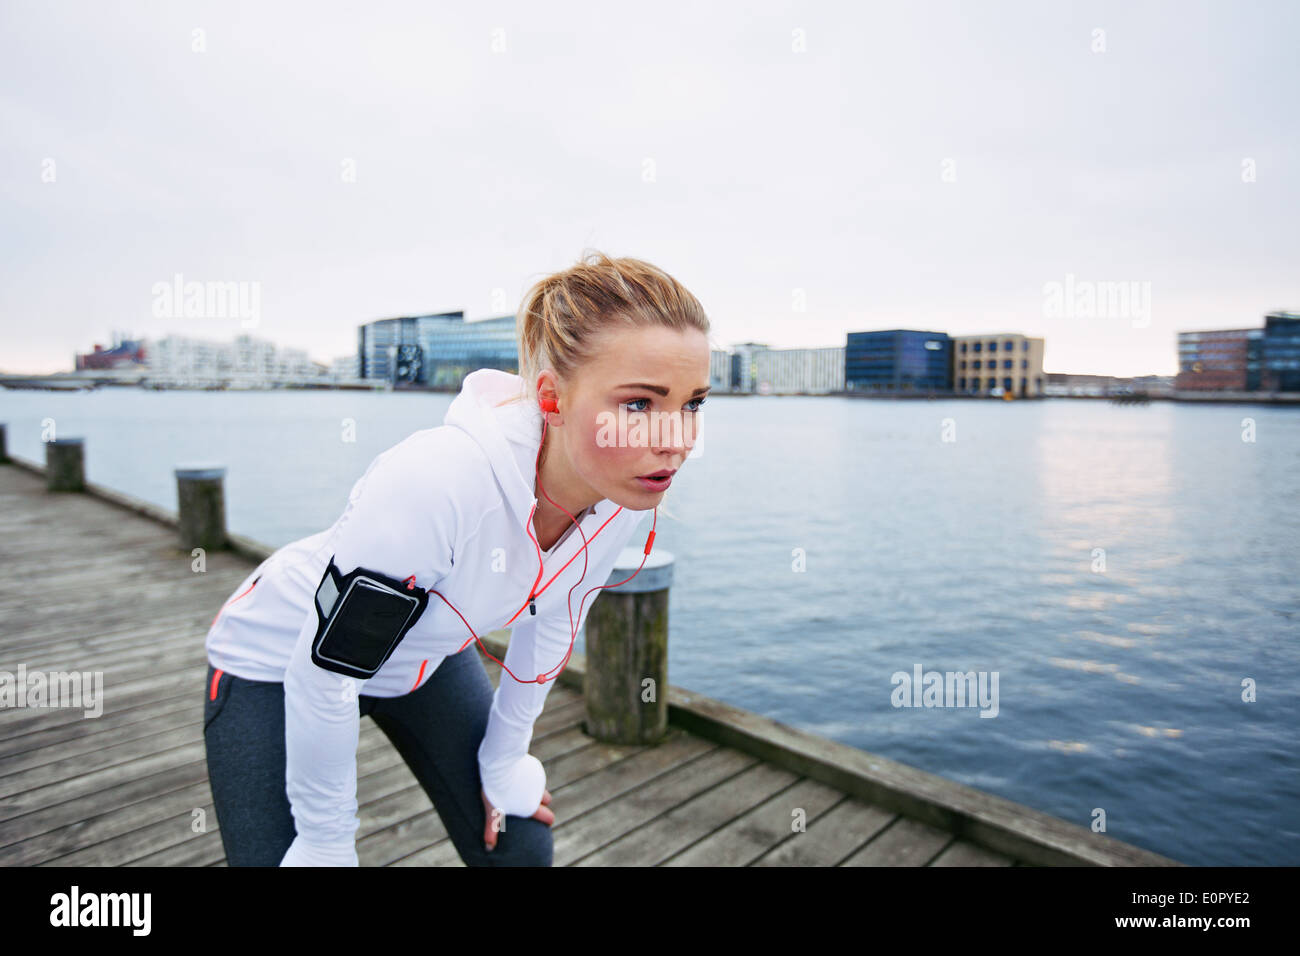 Female runner standing bent over and catching her breath after a running session along river. Young woman taking break after run Stock Photo